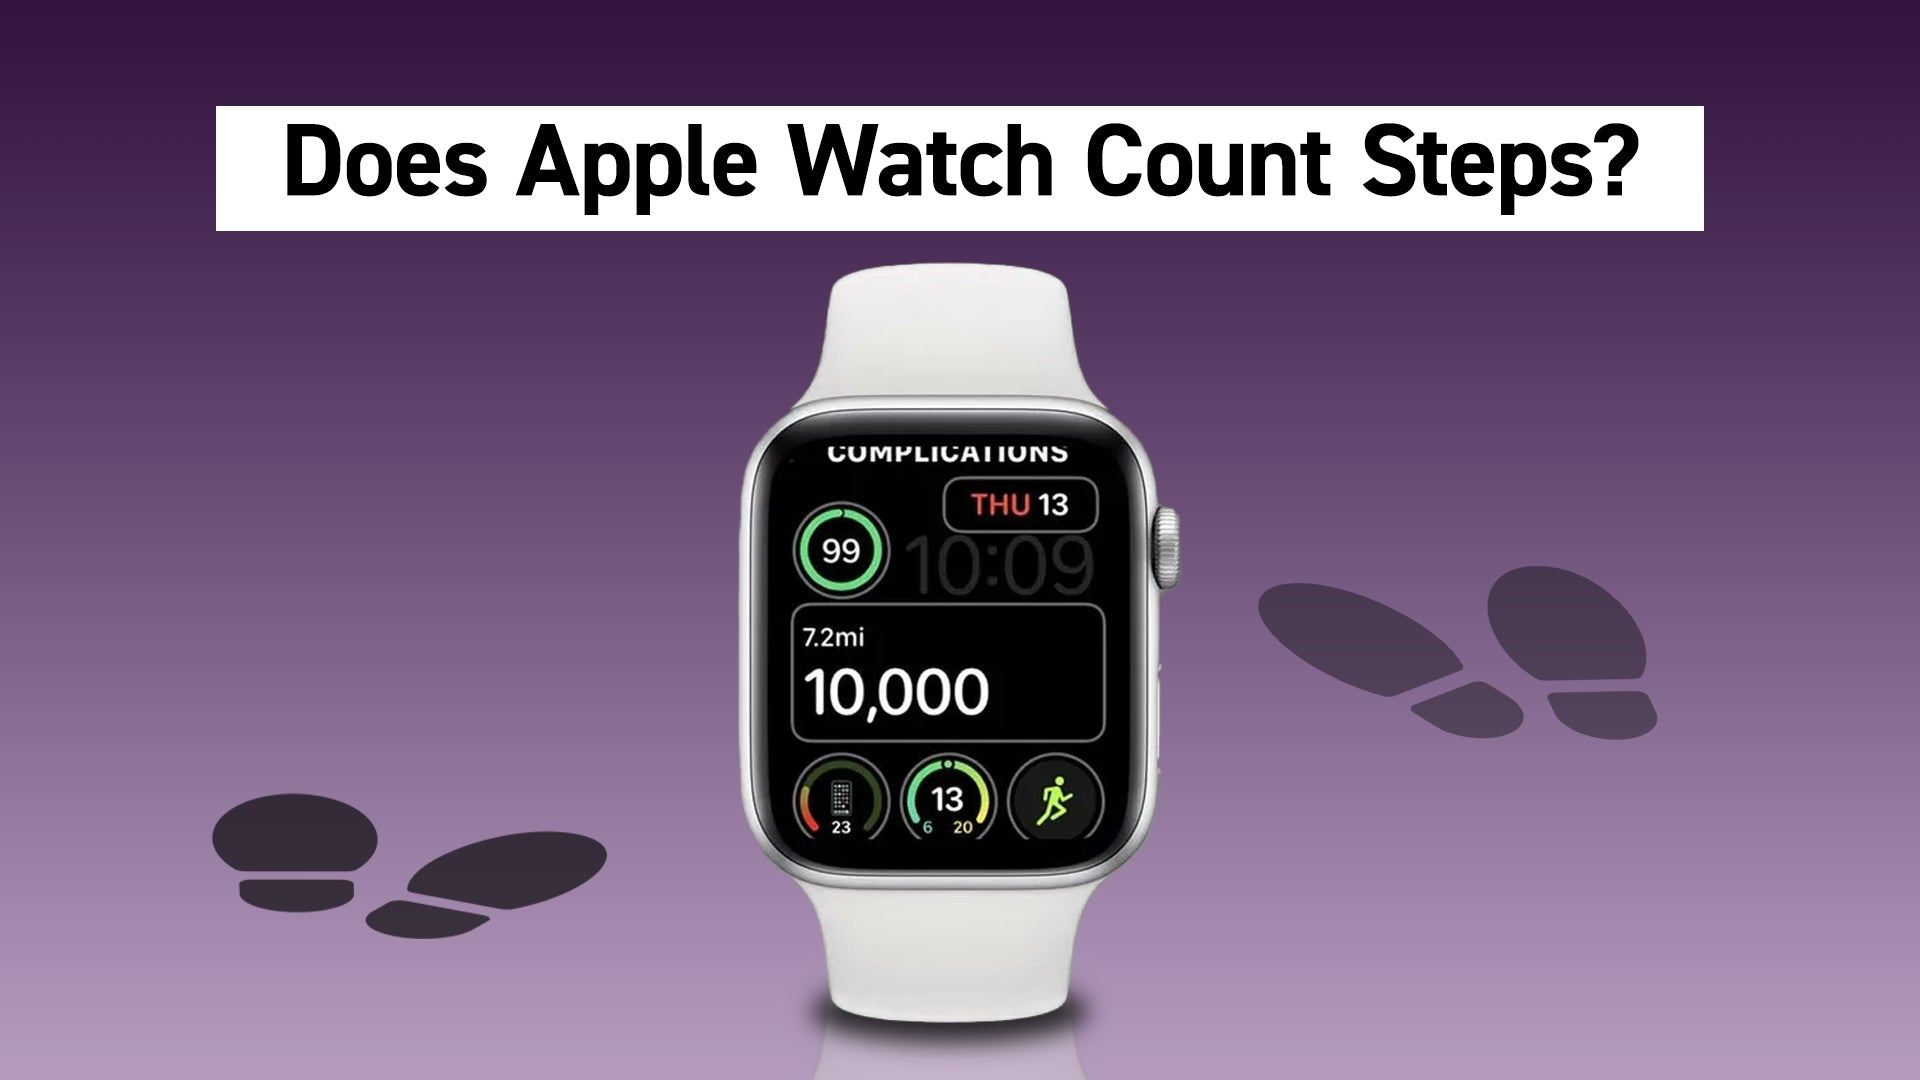 Does Apple Watch Count Steps?